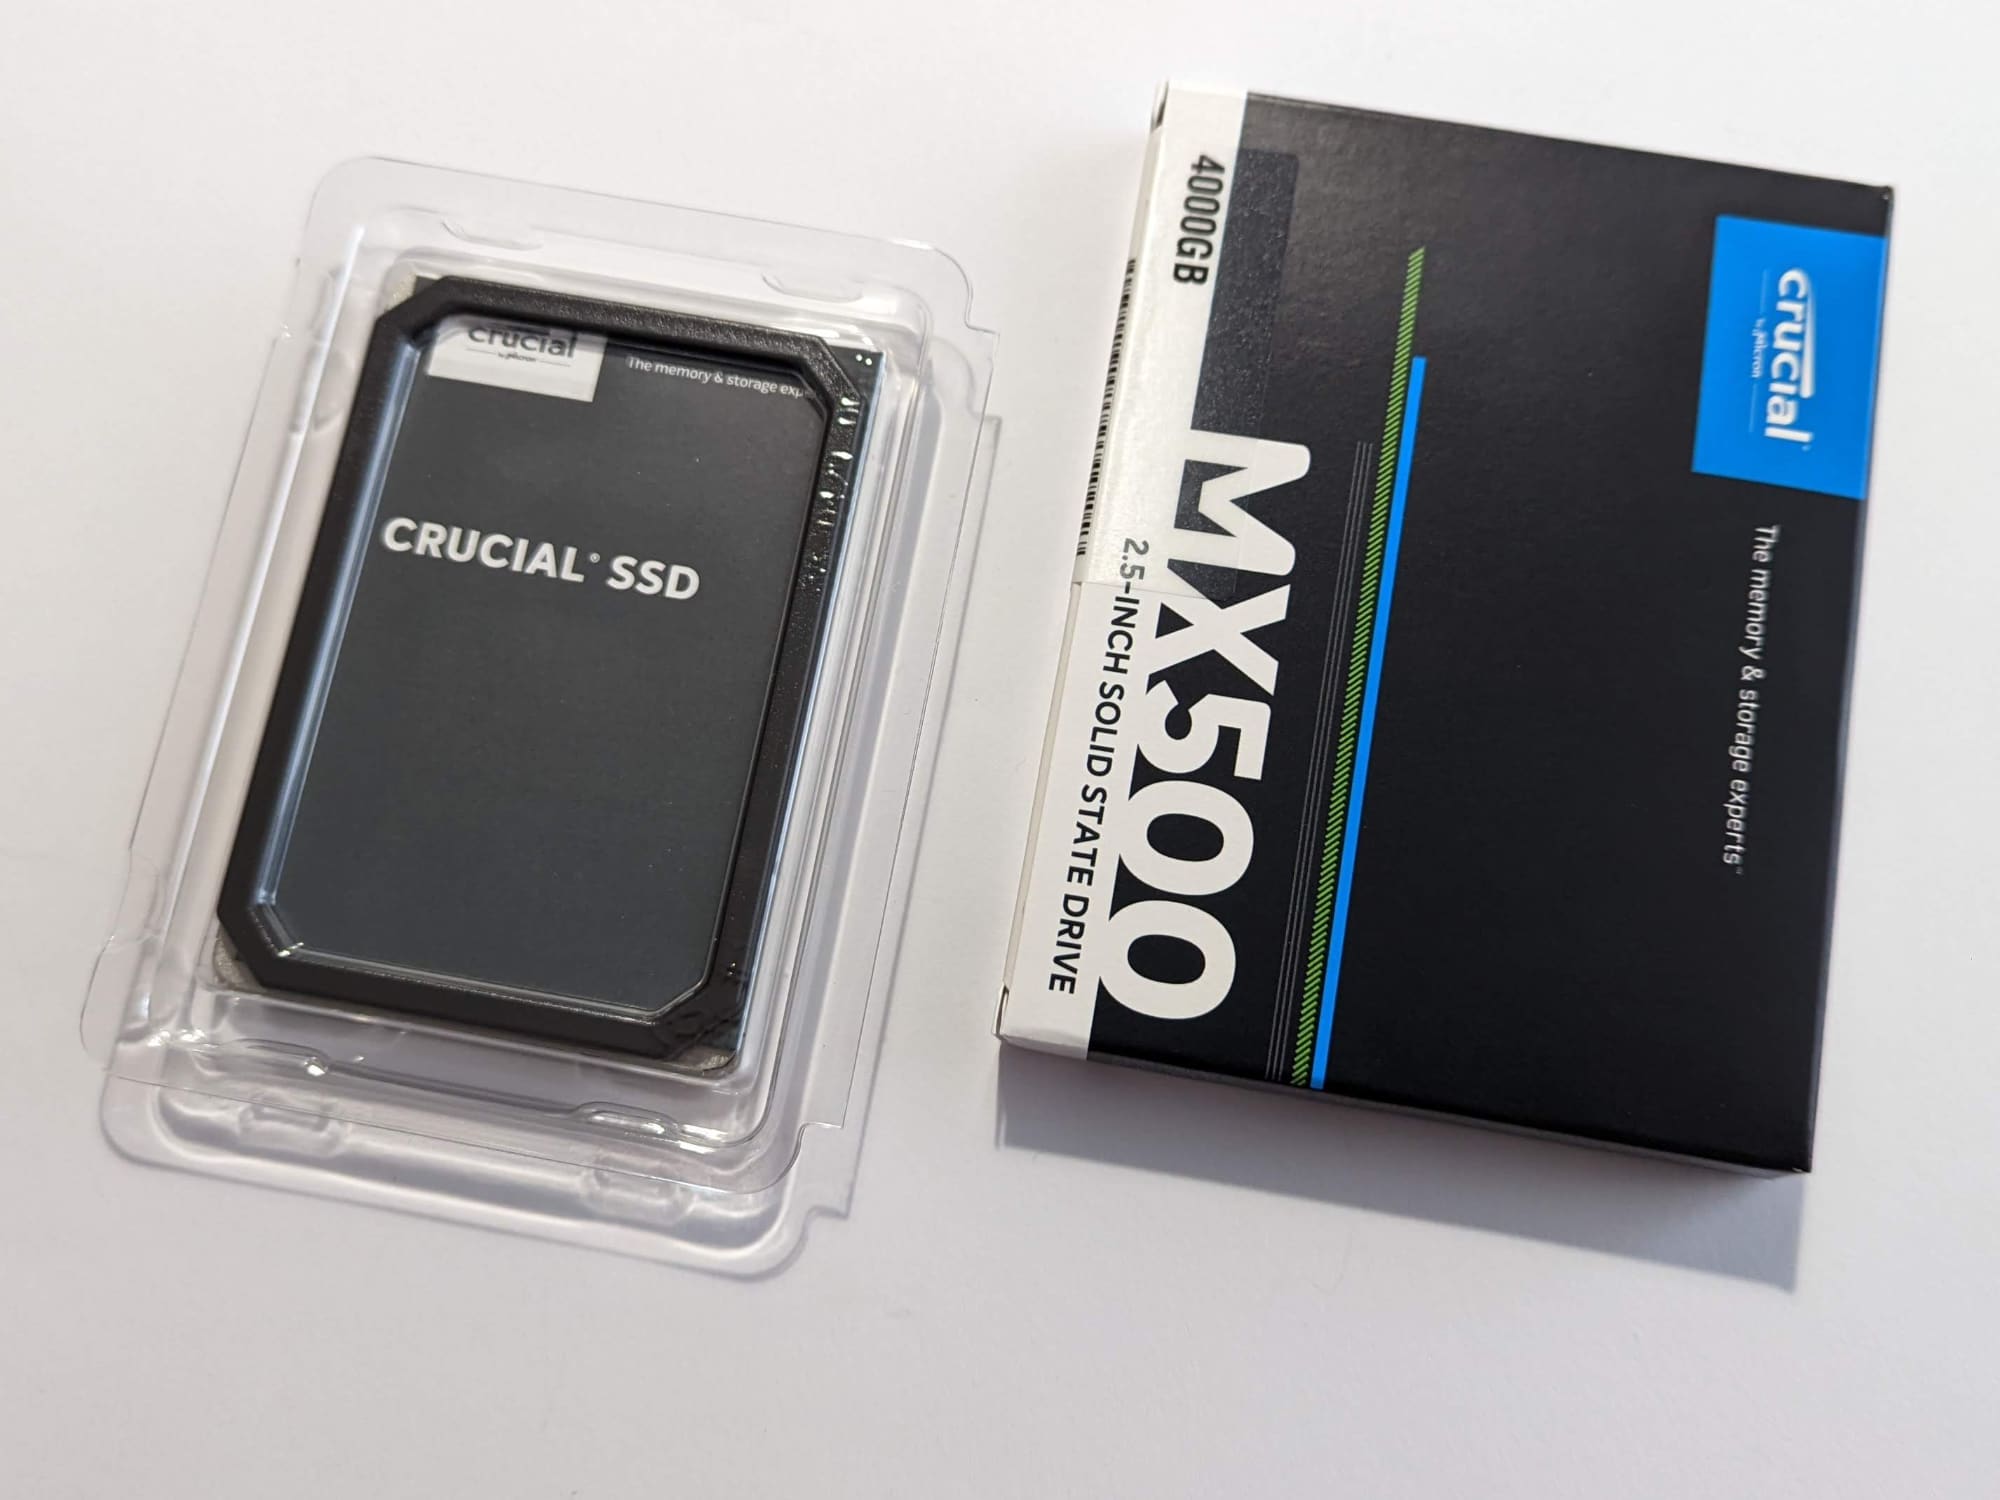 Crucial MX500 - SATA SSD with 4 TB storage capacity in test